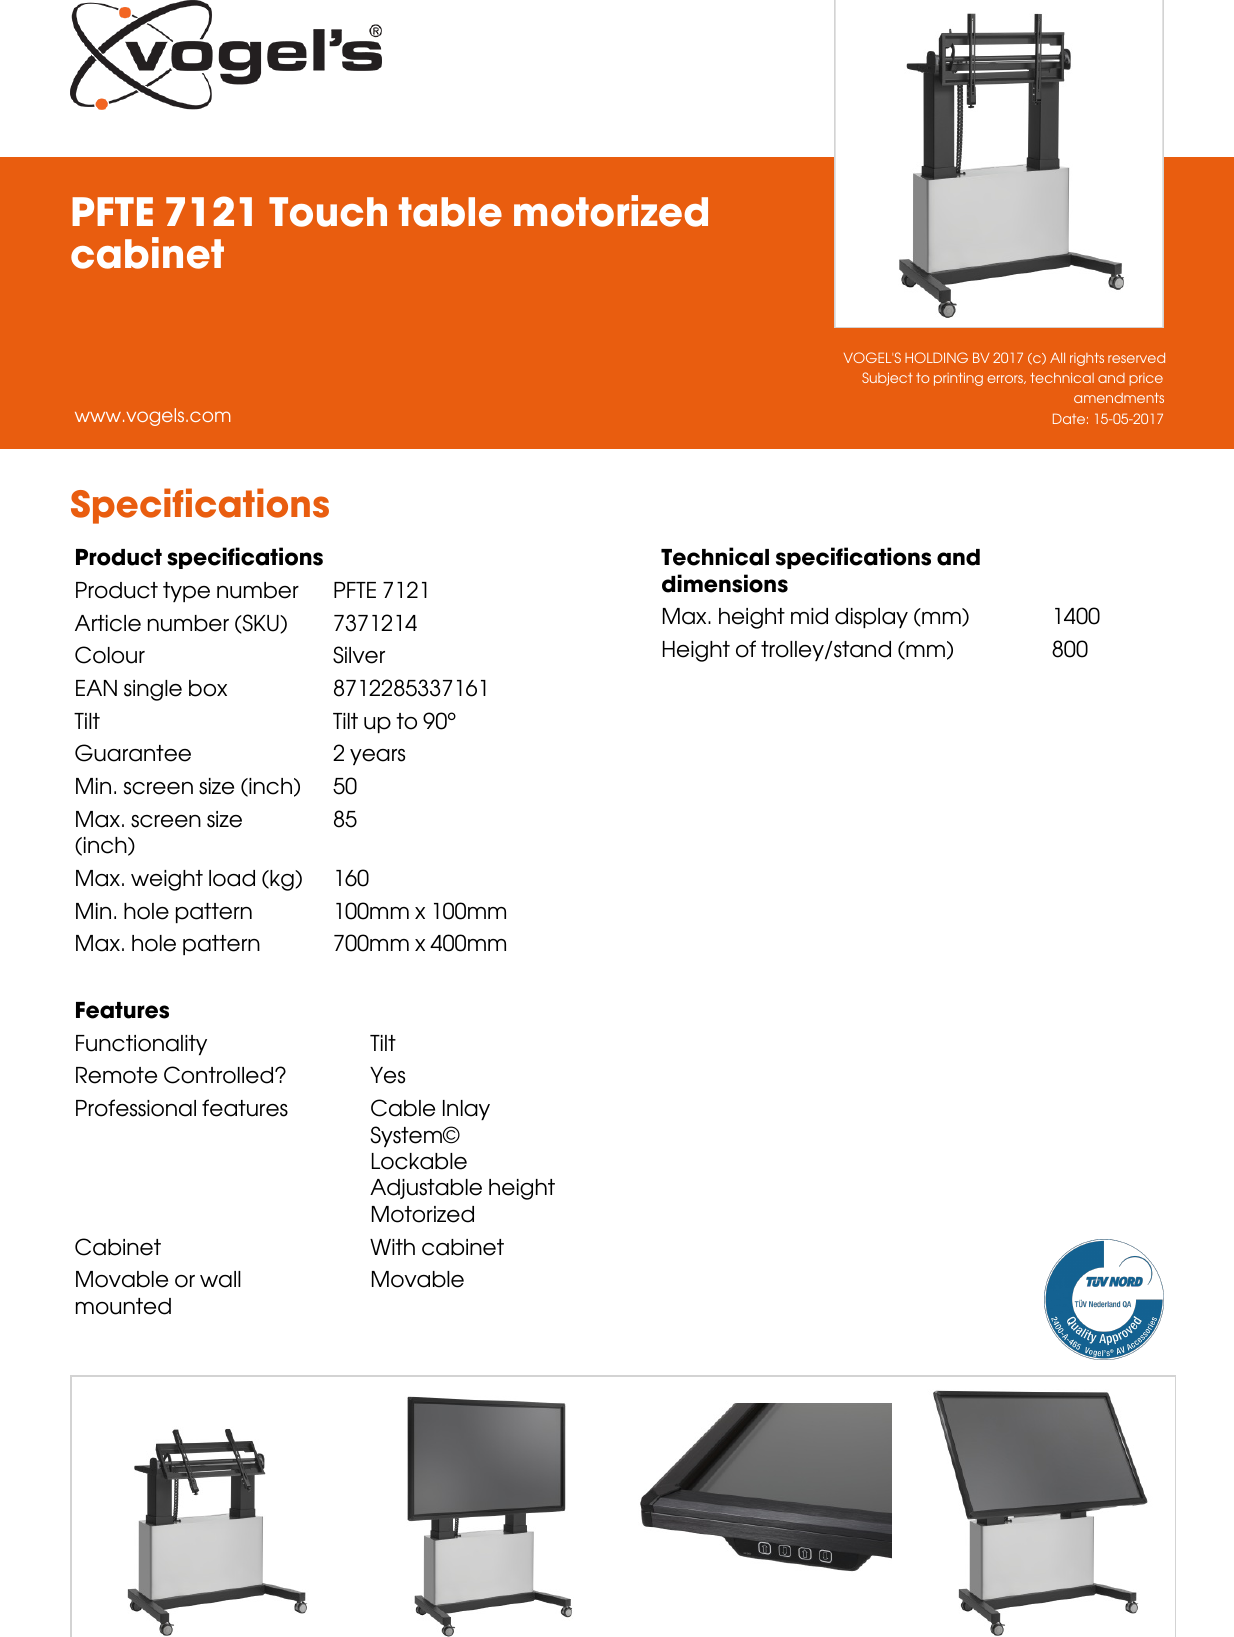 Page 2 of 4 - Leaflet Version 4.0  PFTE-7121-Touch-table-motorized-cabinet-5391-en